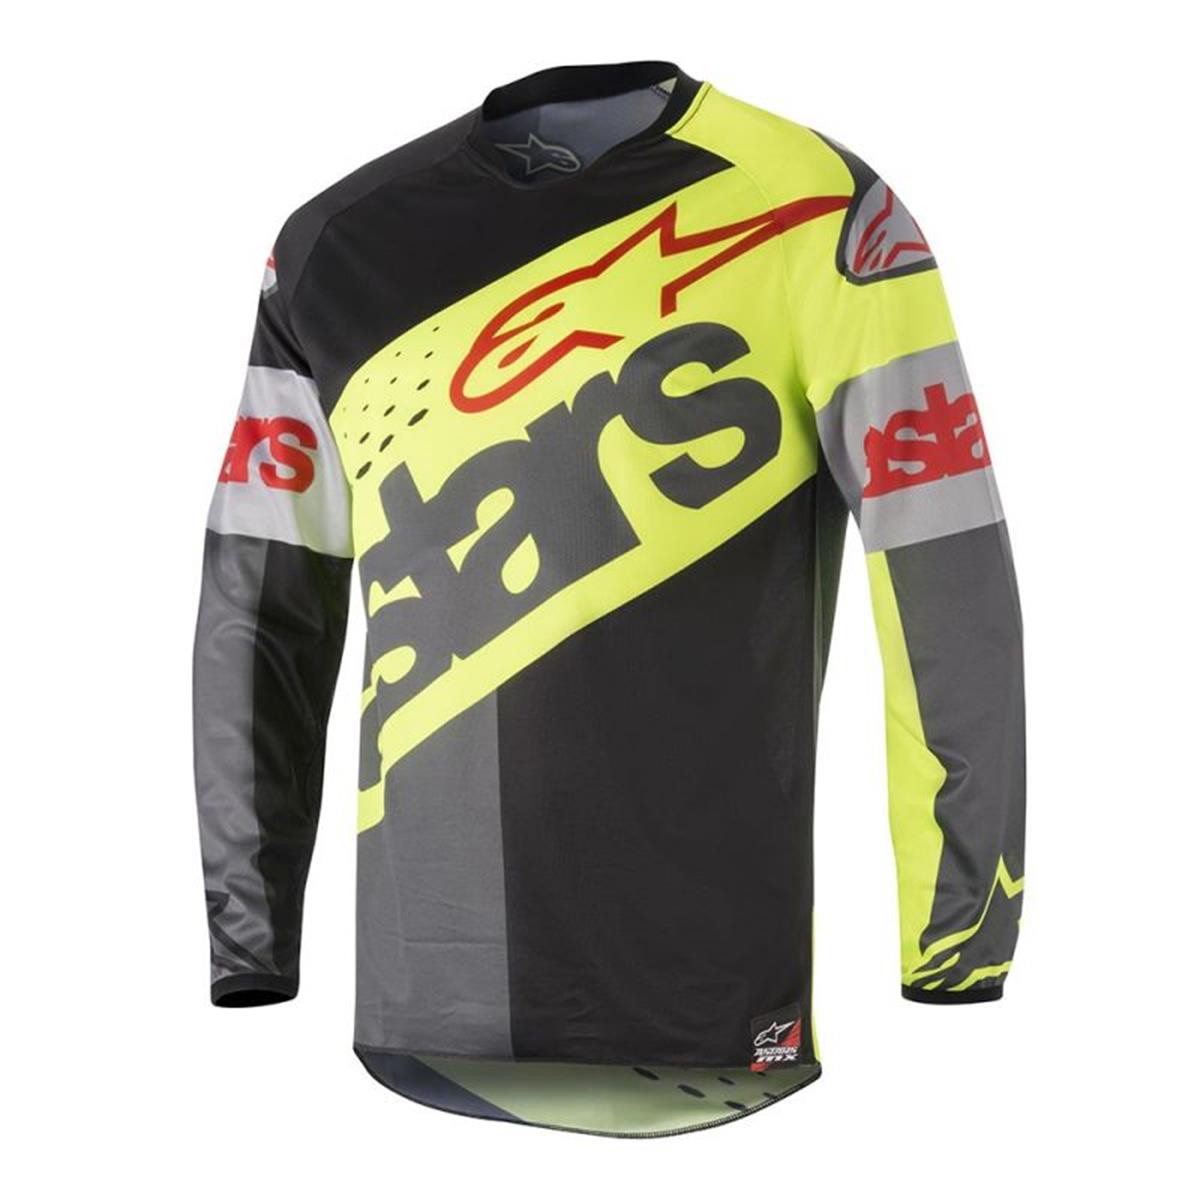 Alpinestars Maillot MX Racer Flagship - Yellow Fluo/Black/Anthracite